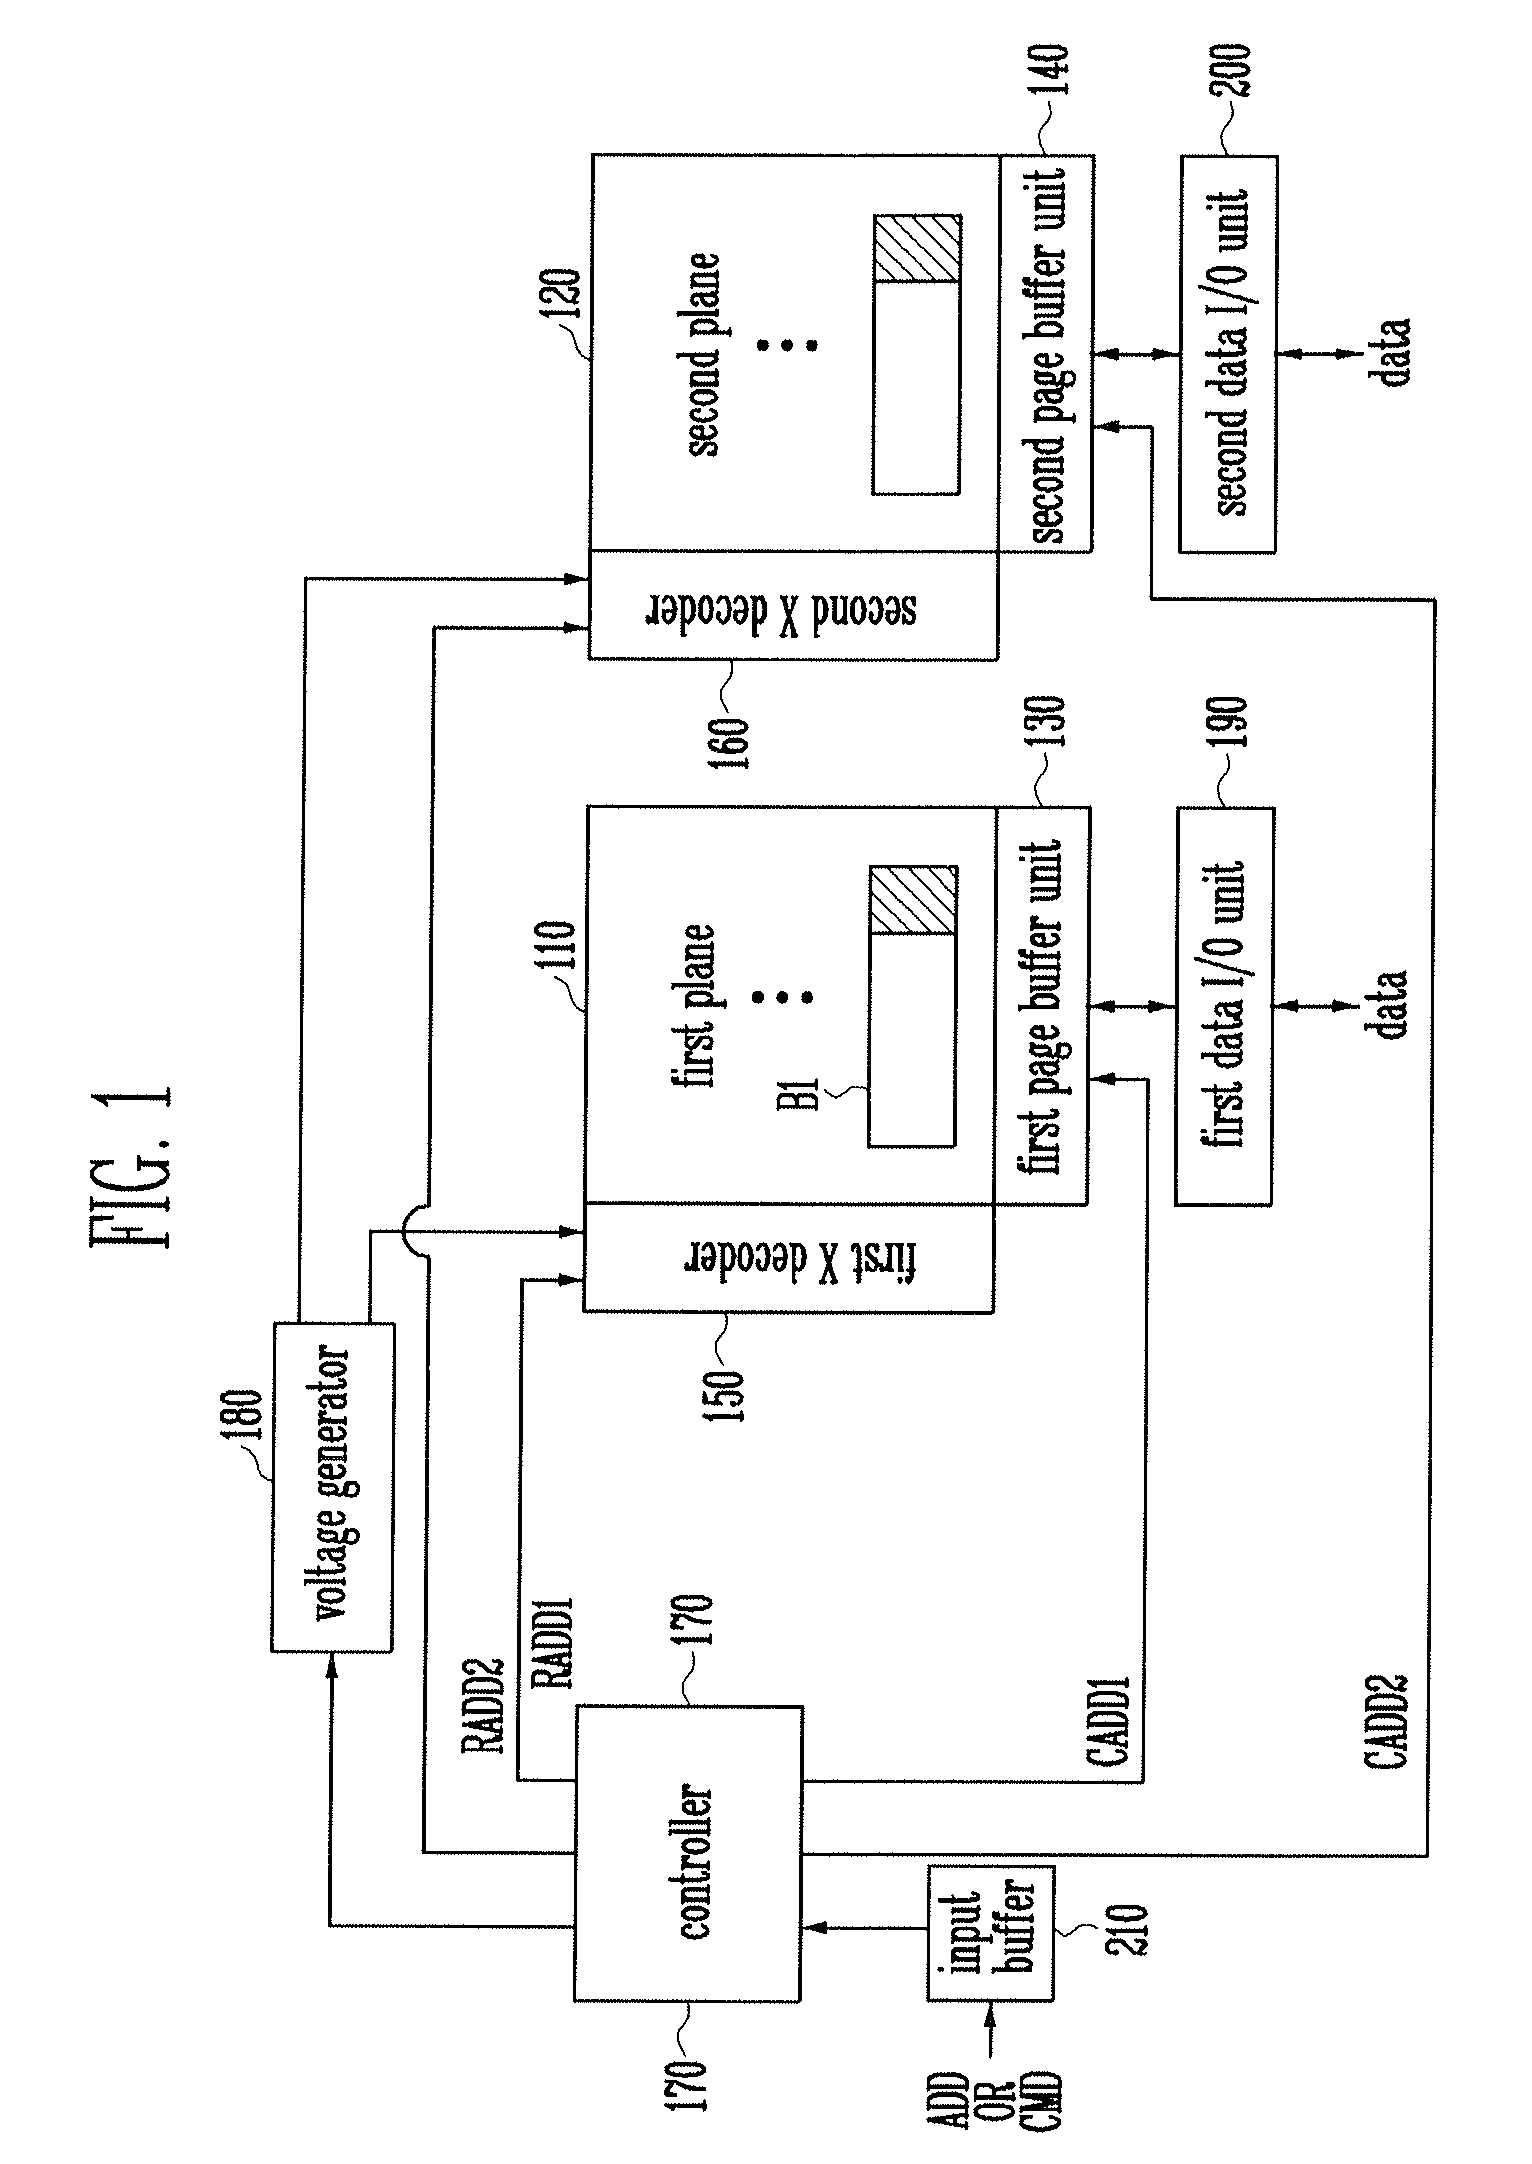 Method of operating nonvolatile memory device capable of reading two planes